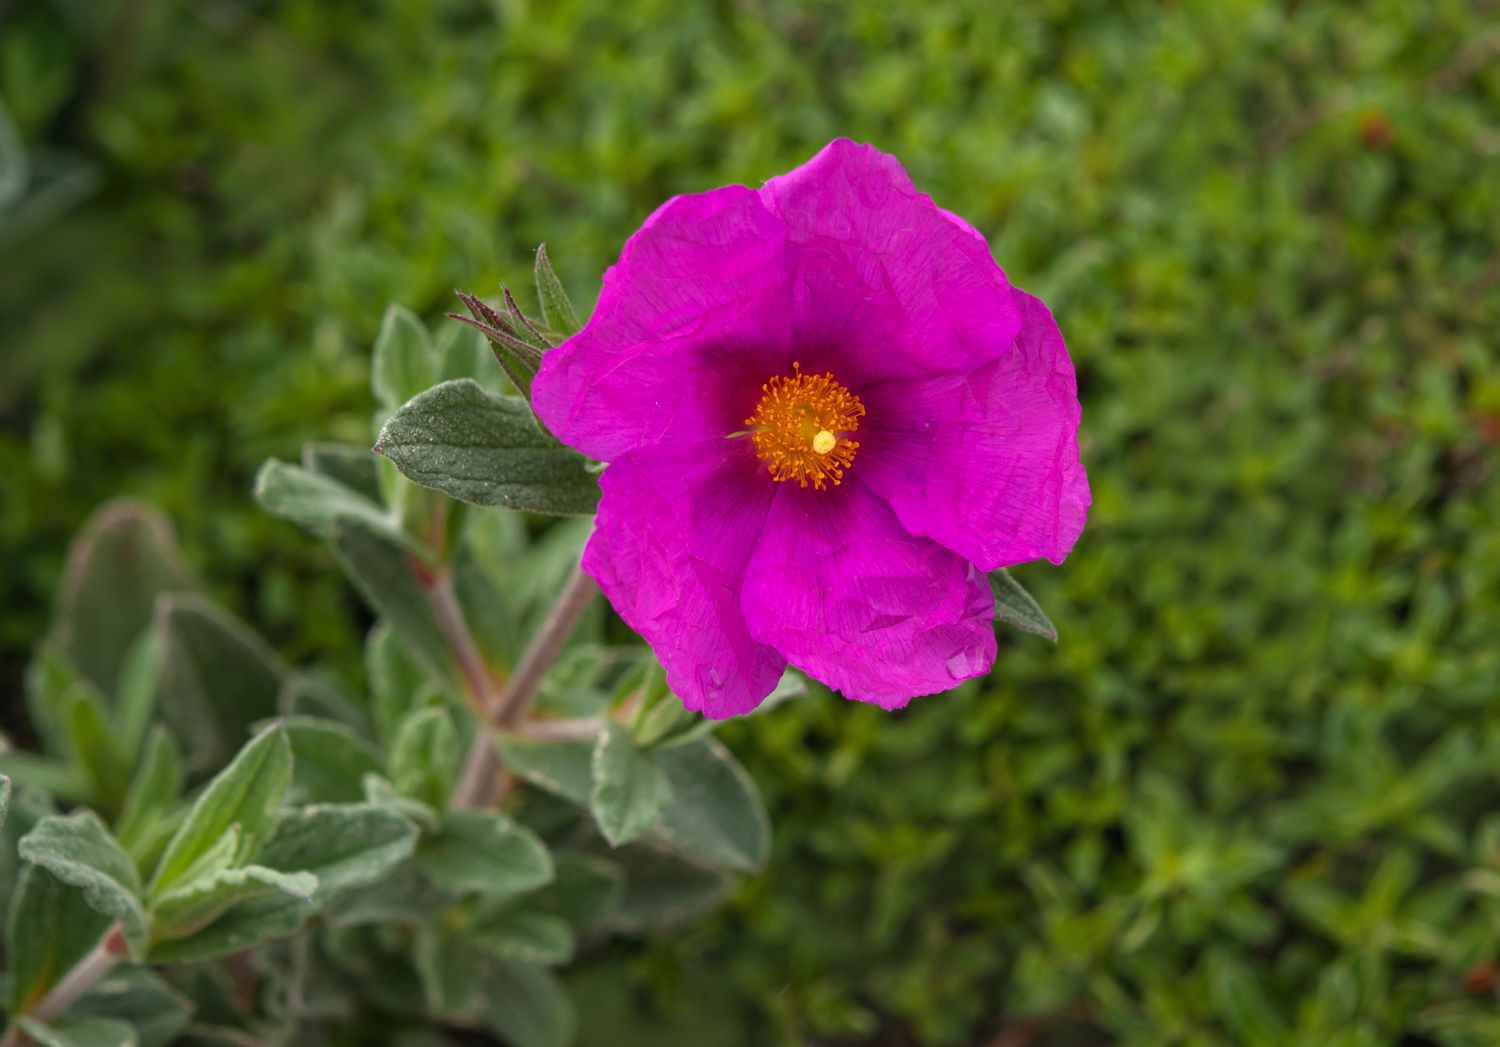 Rockrose shrub stem with bright pink flower with yellow centers